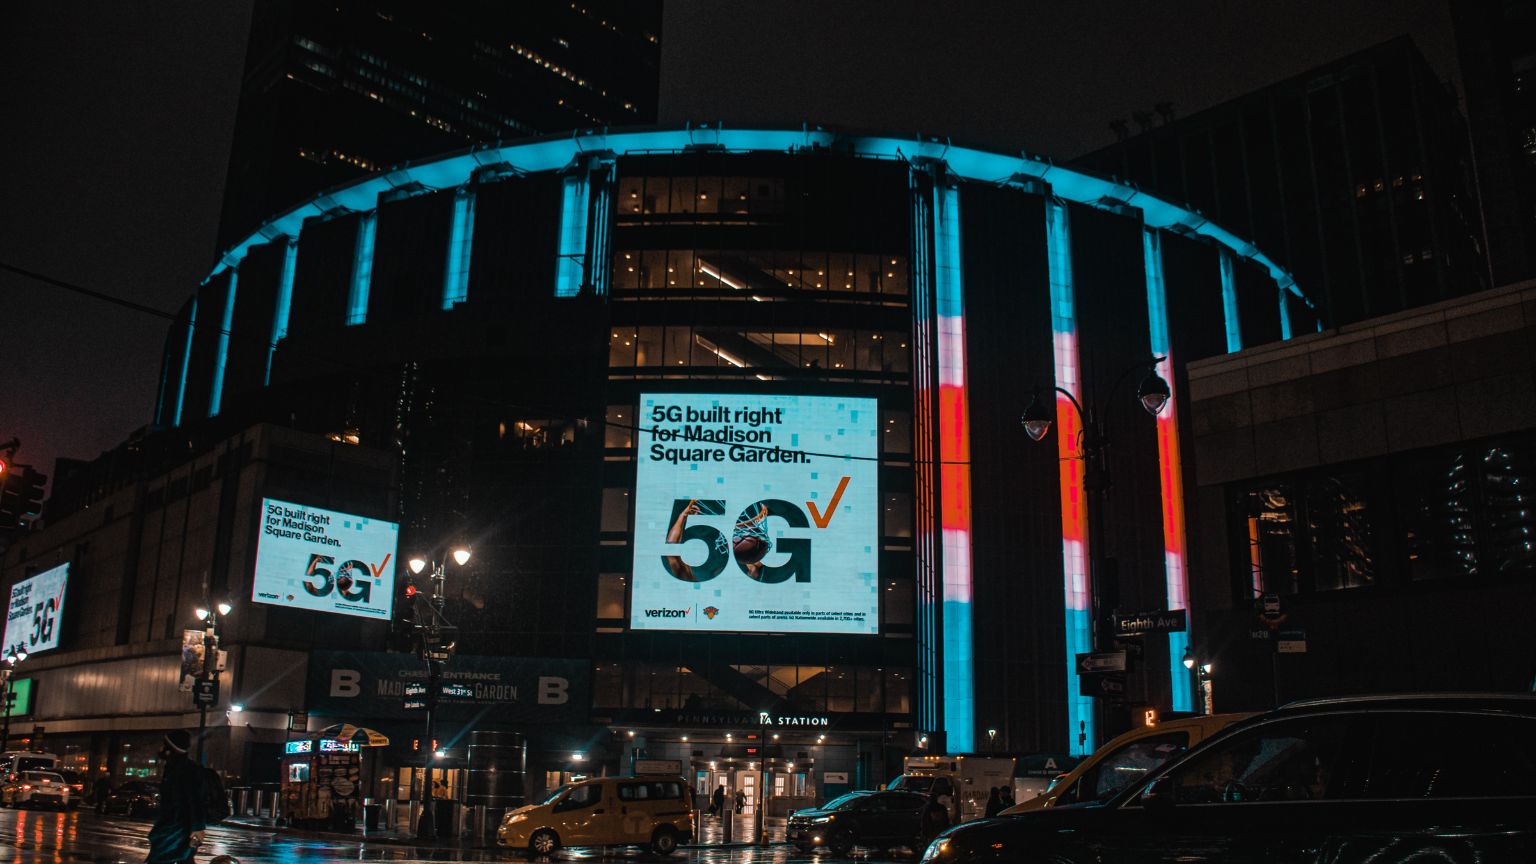 Madison Square Garden Is Sued Over Invasive Facial Recognition Tech